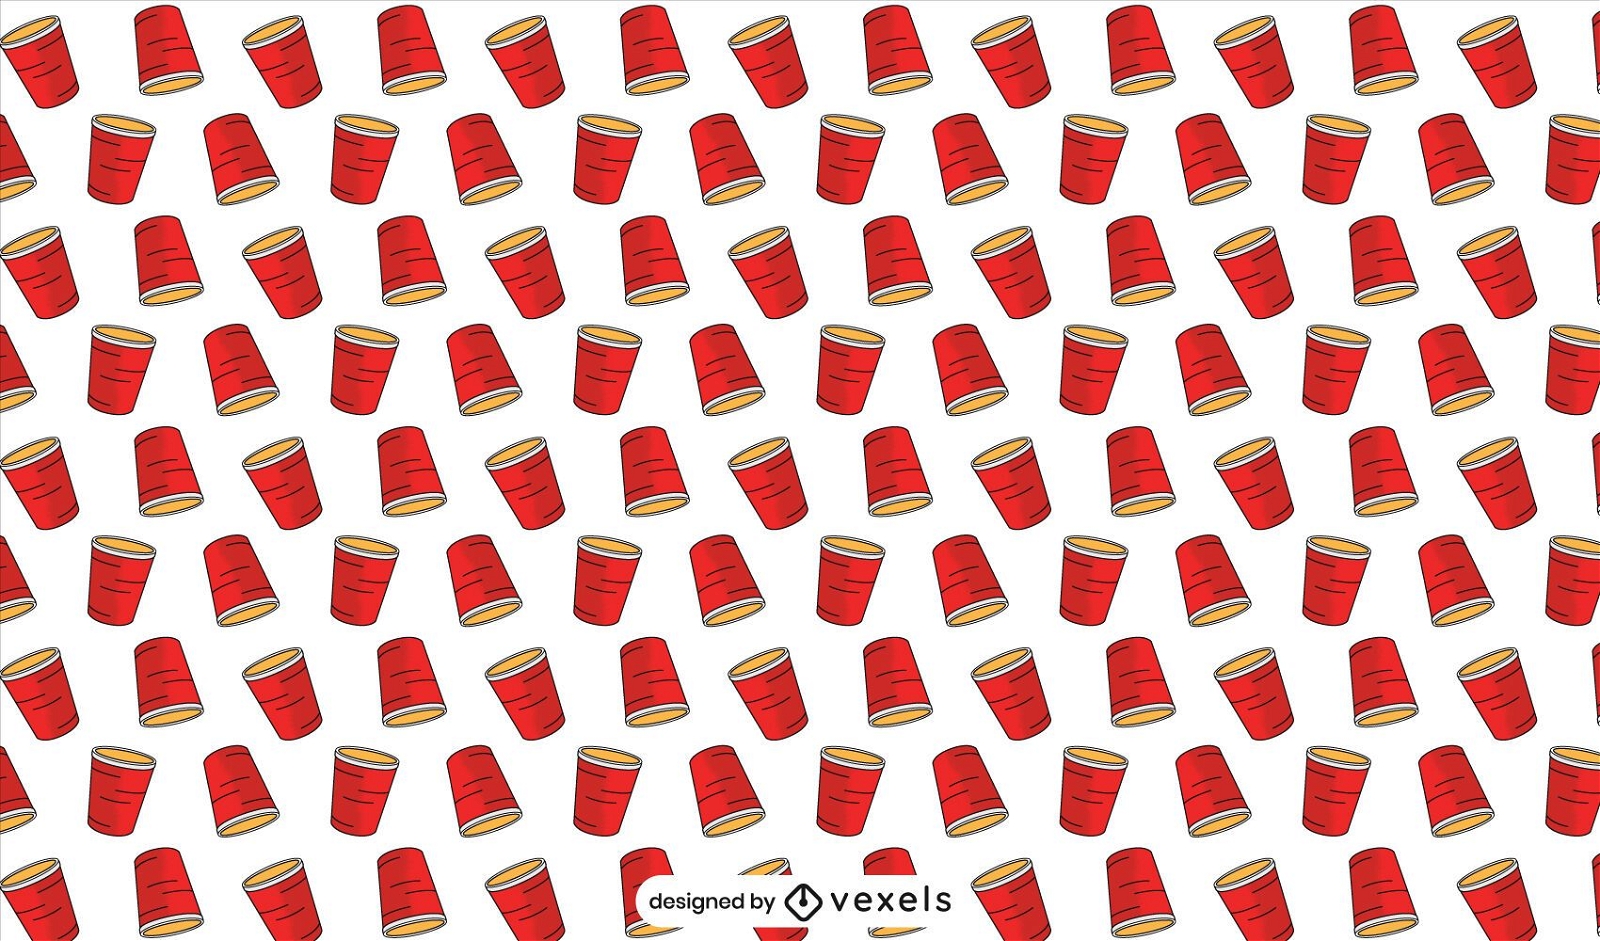 https://images.vexels.com/content/222030/preview/red-cups-pattern-design-0c6827.png